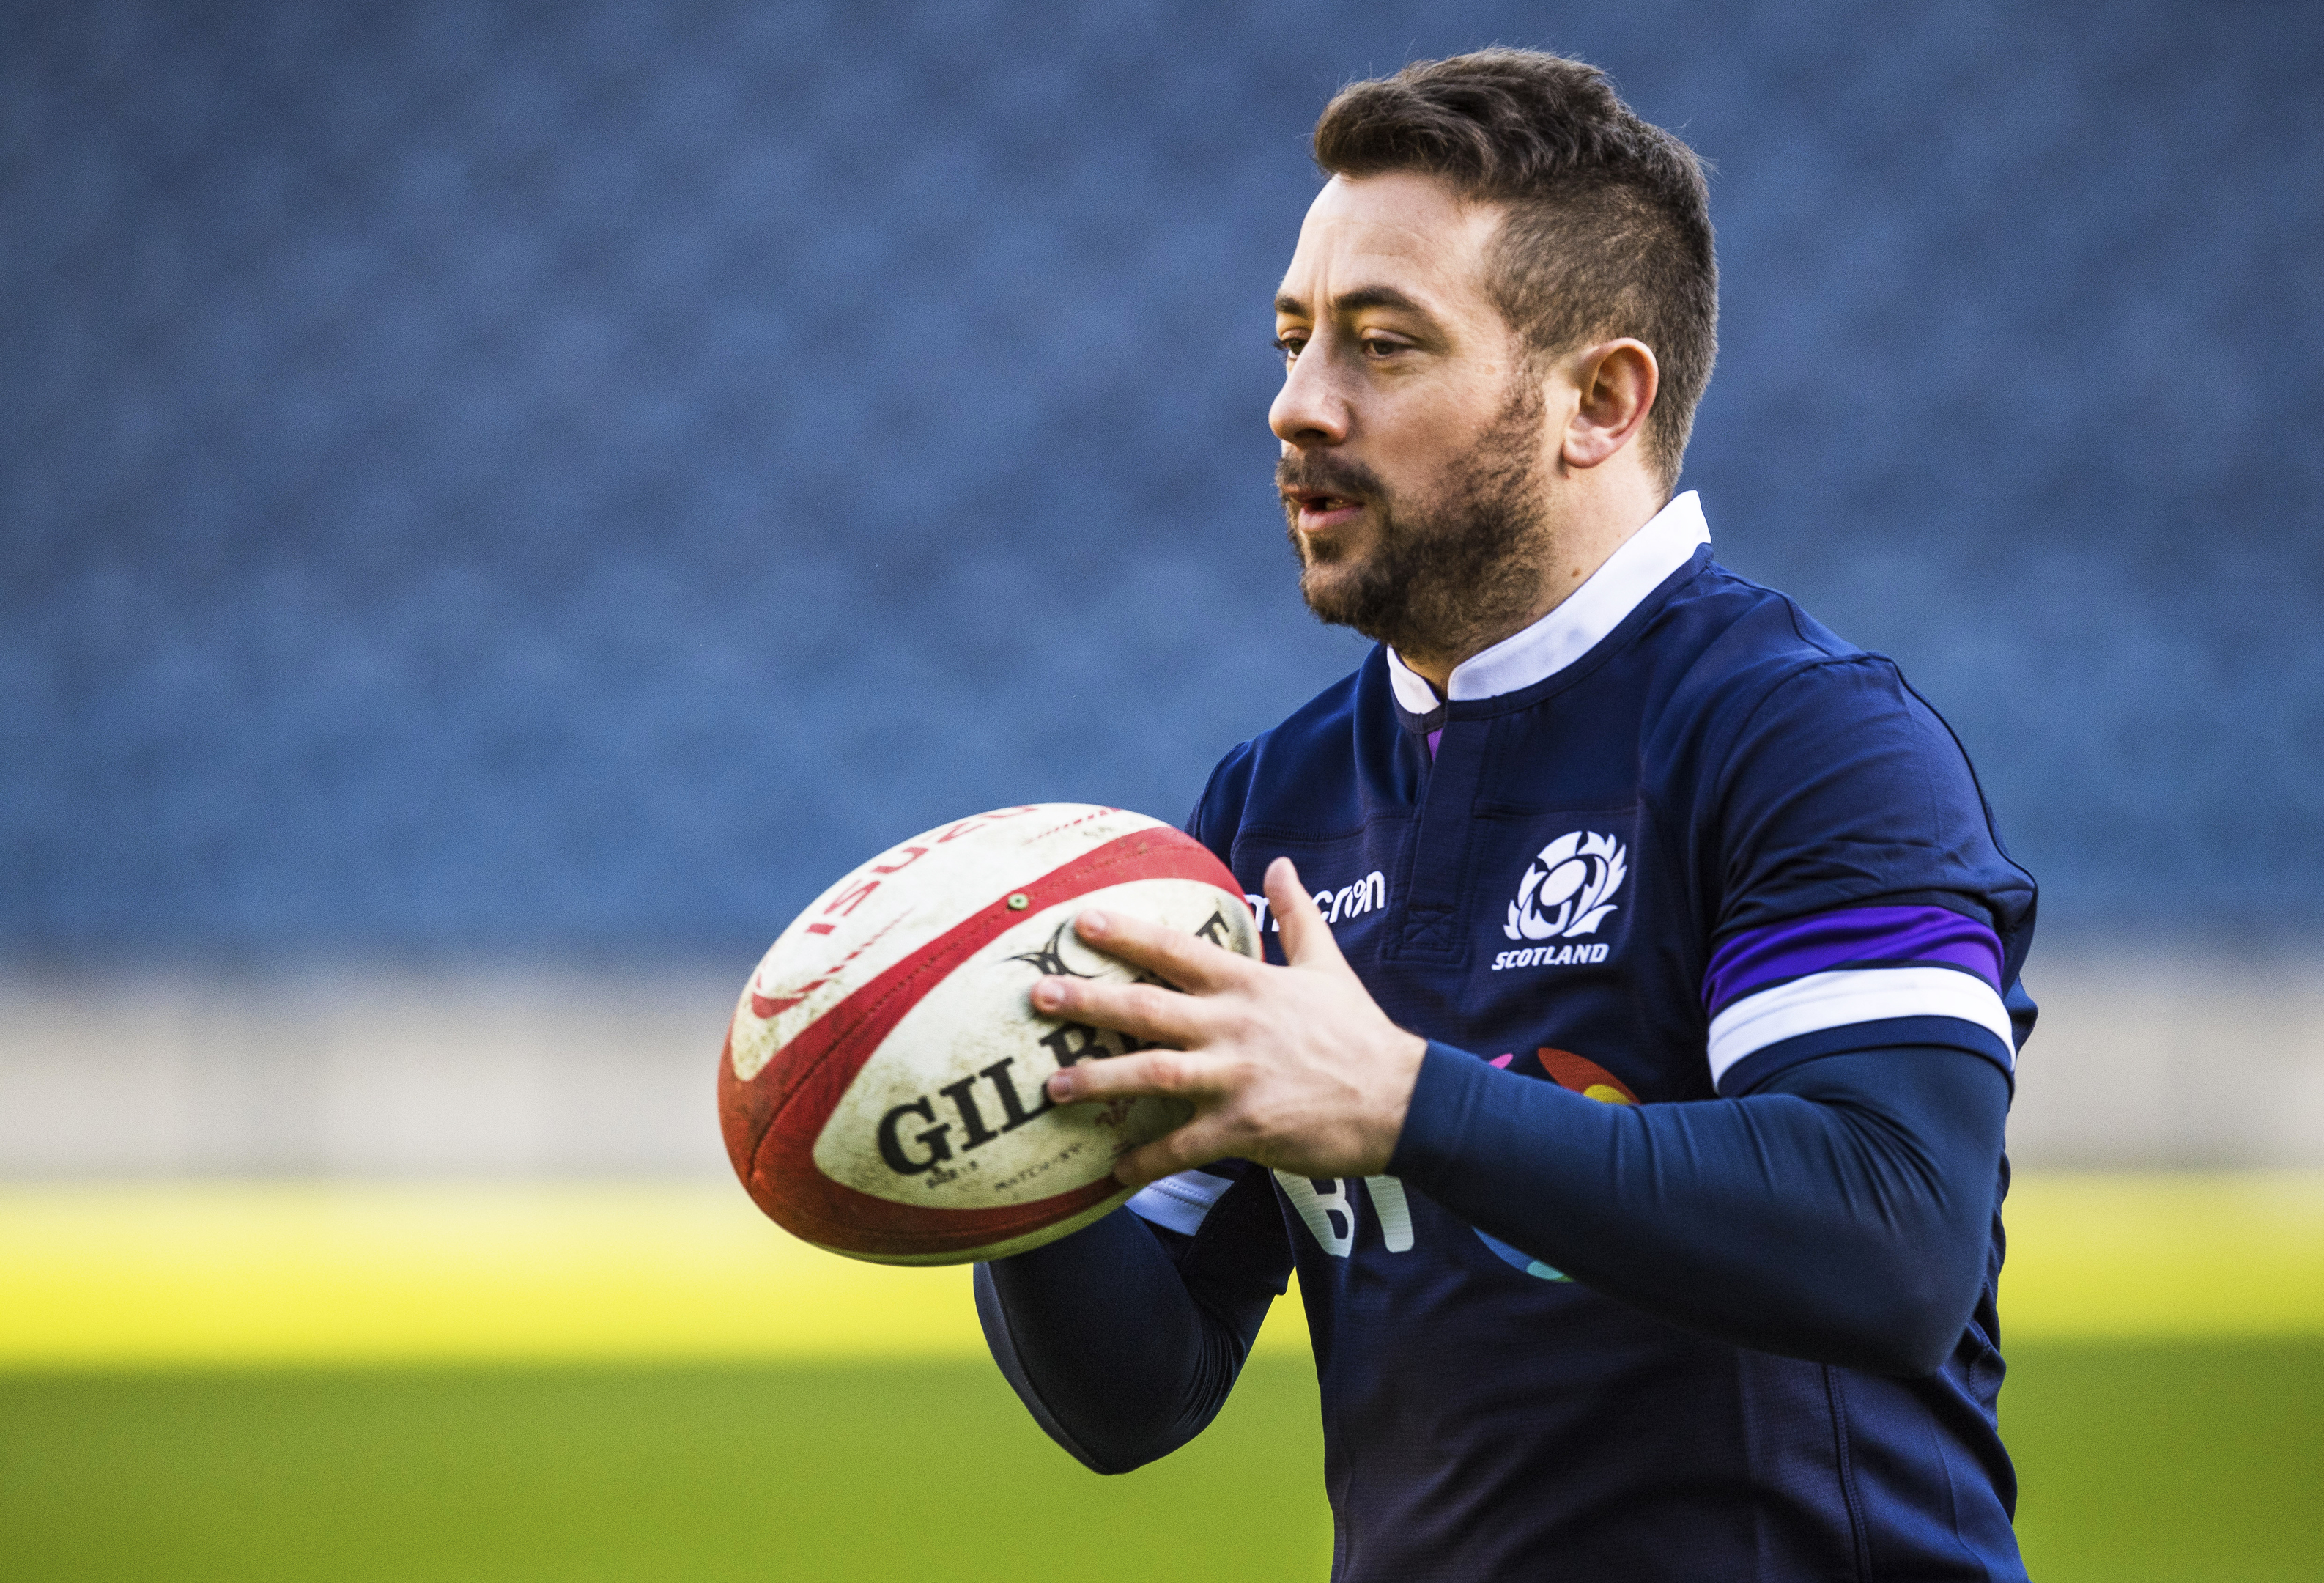 Greig Laidlaw could be recalled to the Scotland starting team against France.